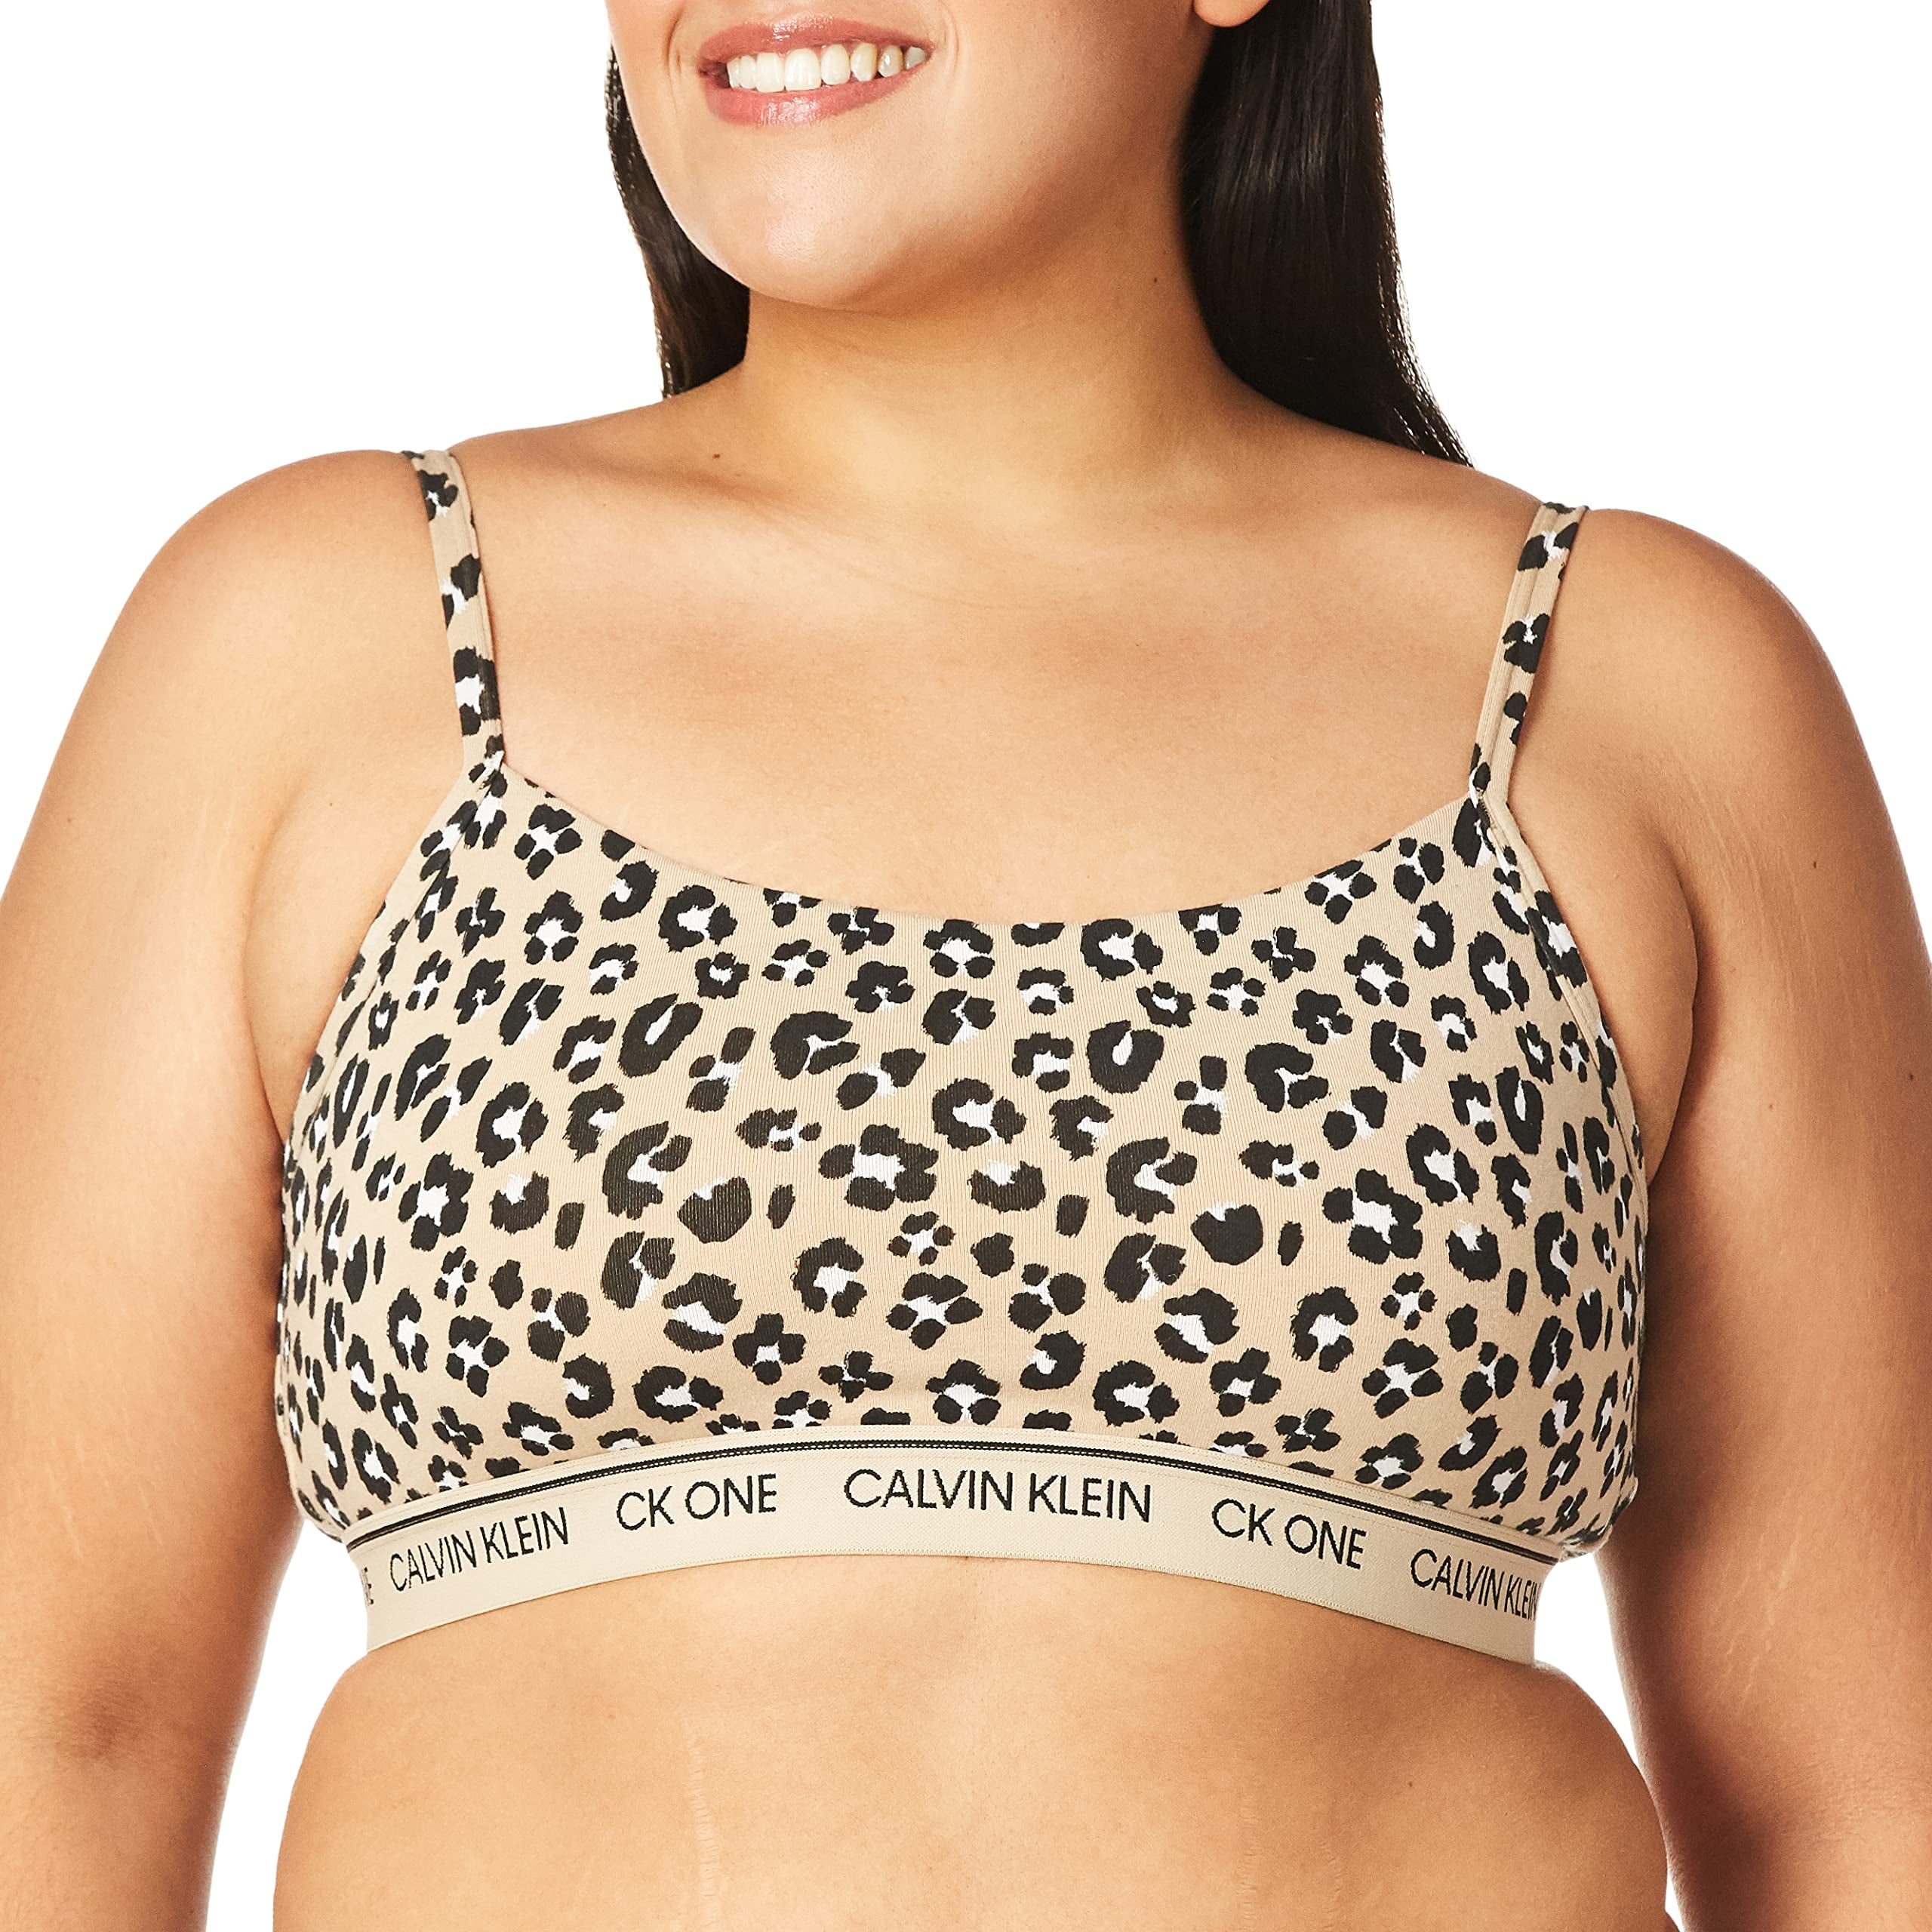 Calvin Klein CK One Cotton unlined triangle bralet in snake print